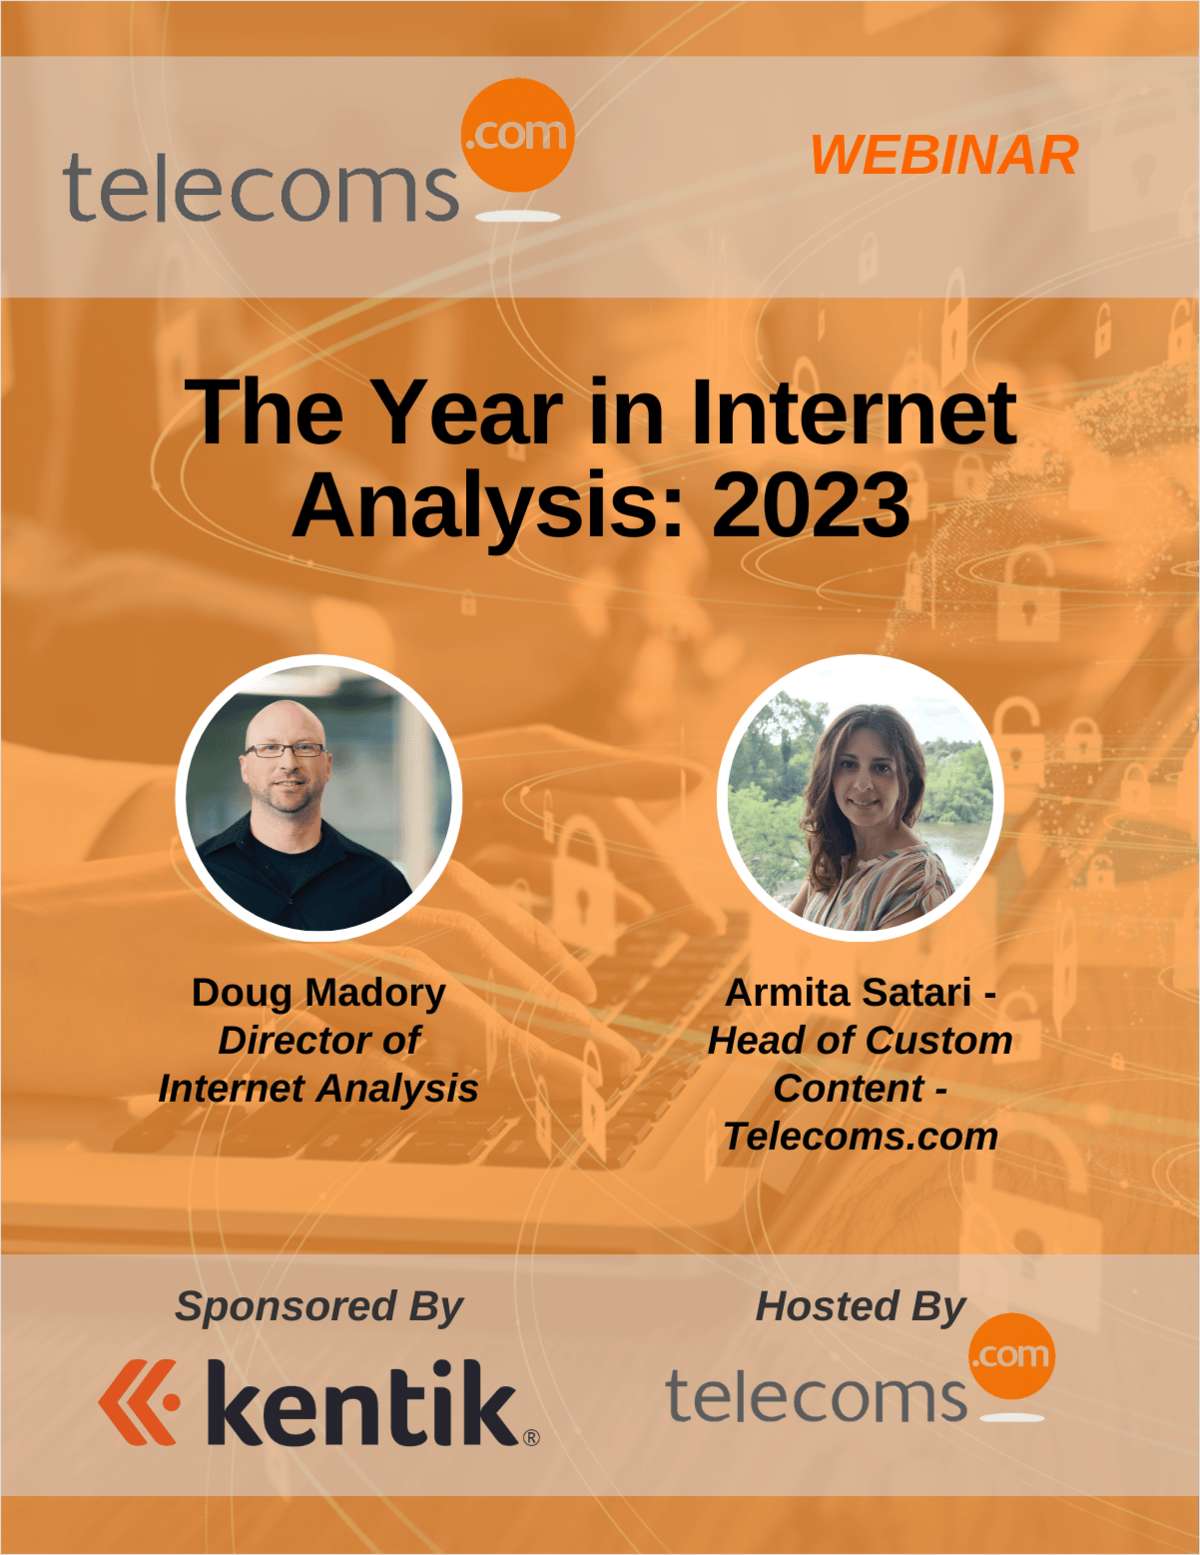 The Year in Internet Analysis: 2023